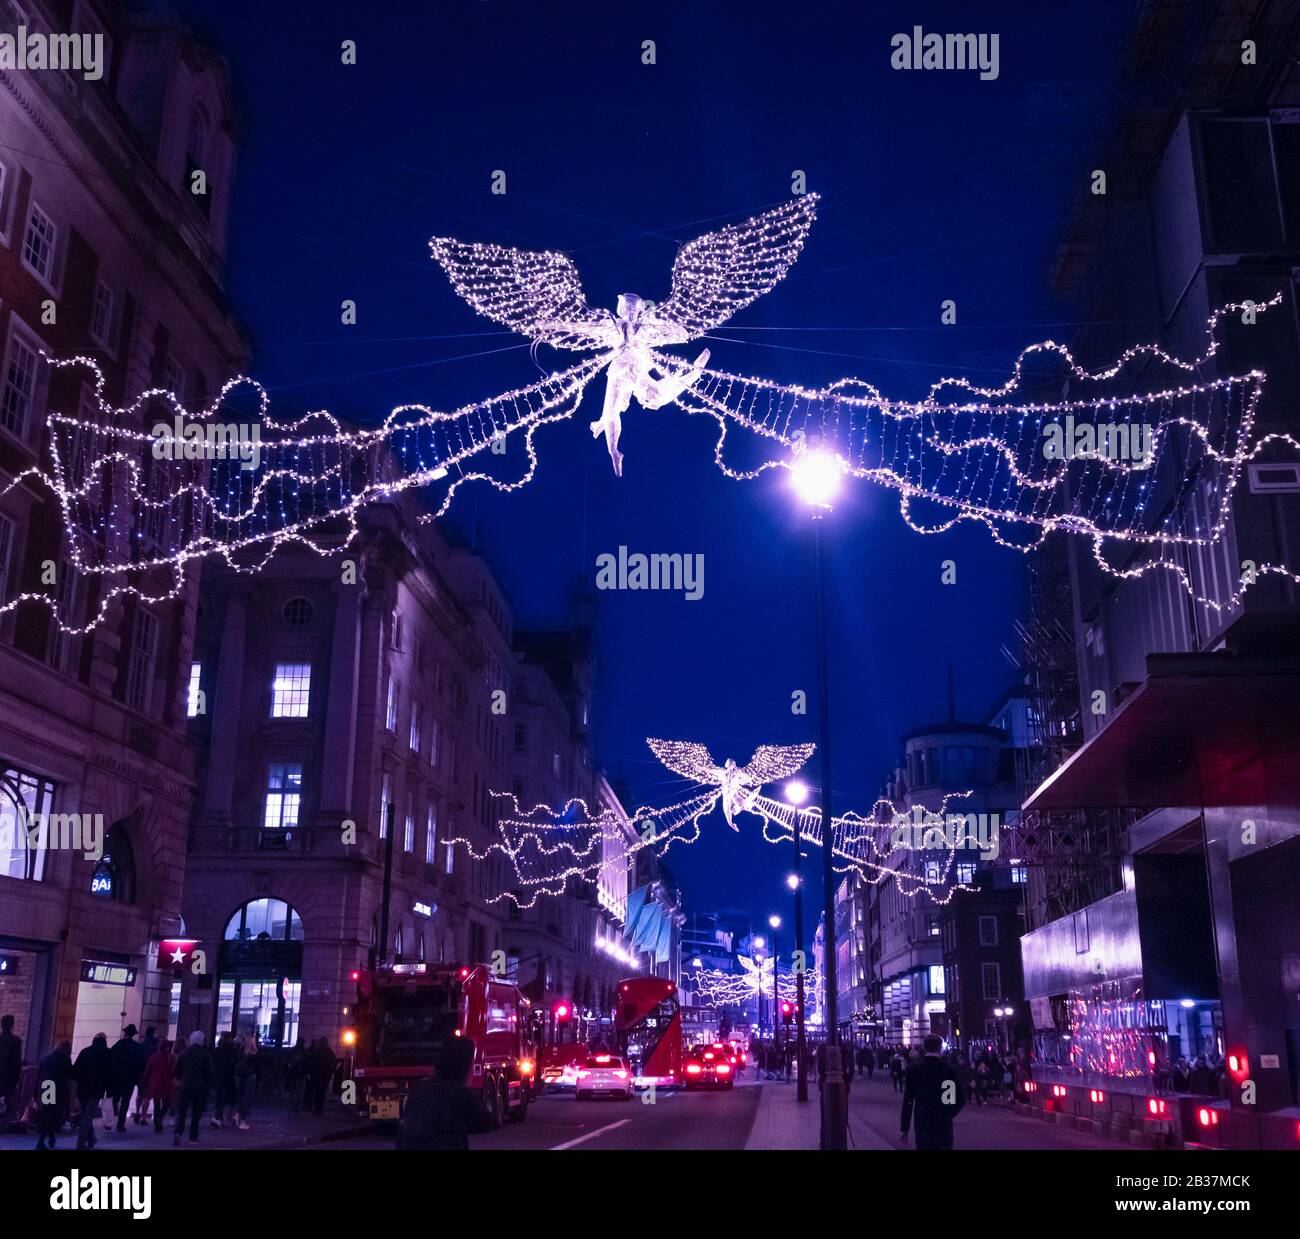 A busy street scene at night time during the festive period in Piccadilly, London, UK. Stock Photo